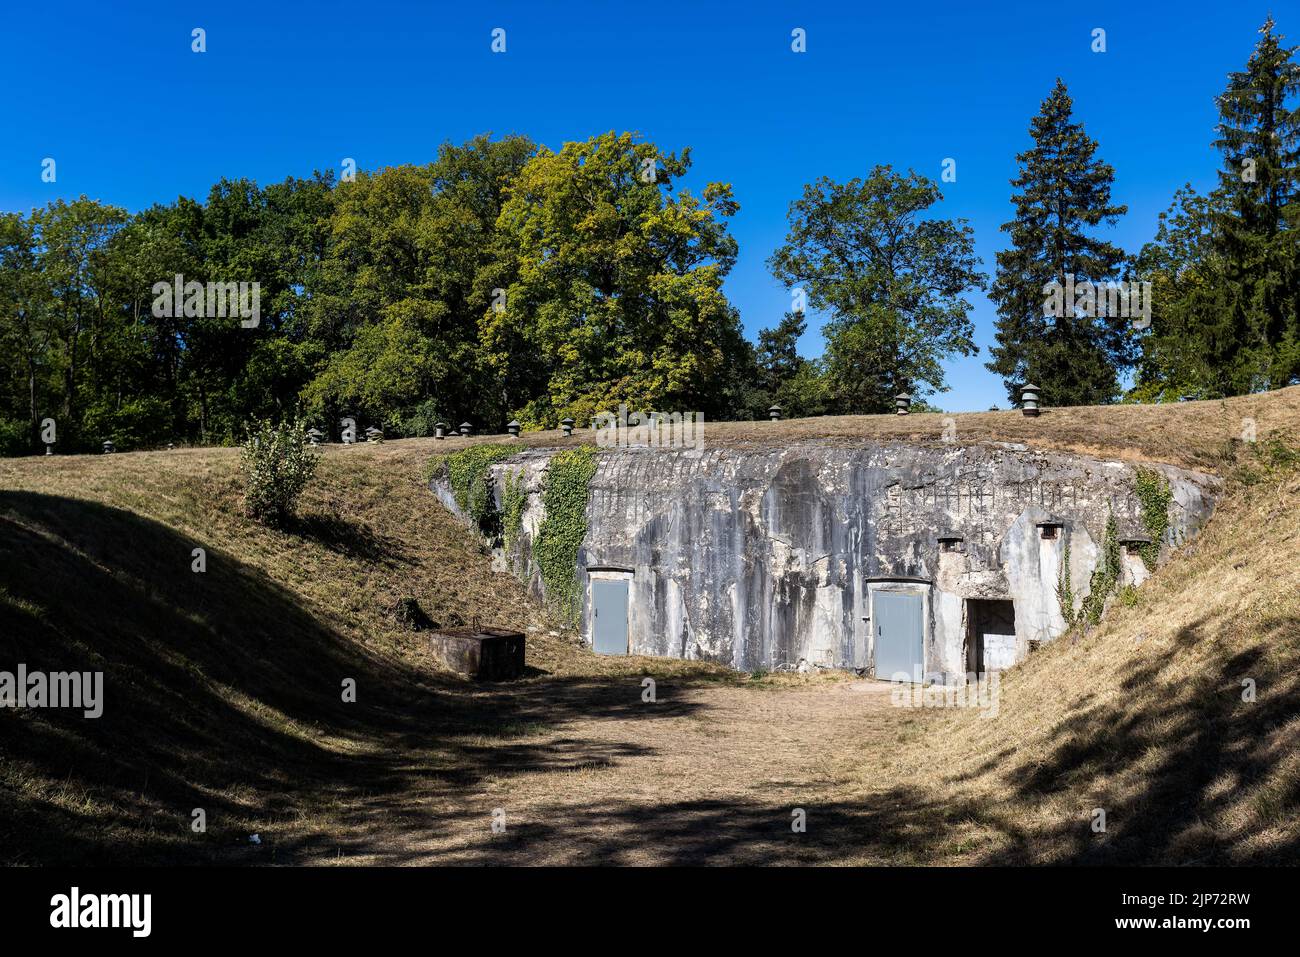 10 August 2022, France, Mutzig: The entrance doors of a bunker can be seen between overgrown hills. The 'Feste Kaiser Wilhelm II' complex with underground barracks and corridors, built from 1893 during the German Empire, is to be sold by the French military to the local community association. The latter wants to improve the hitherto provisional facilities for visitors. A local association is responsible for visitor care - but after the Corona crisis, guests from neighboring Germany are staying away. (to dpa 'Association wants more visitors from Germany at the Kaiser Fort') Photo: Philipp Stock Photo